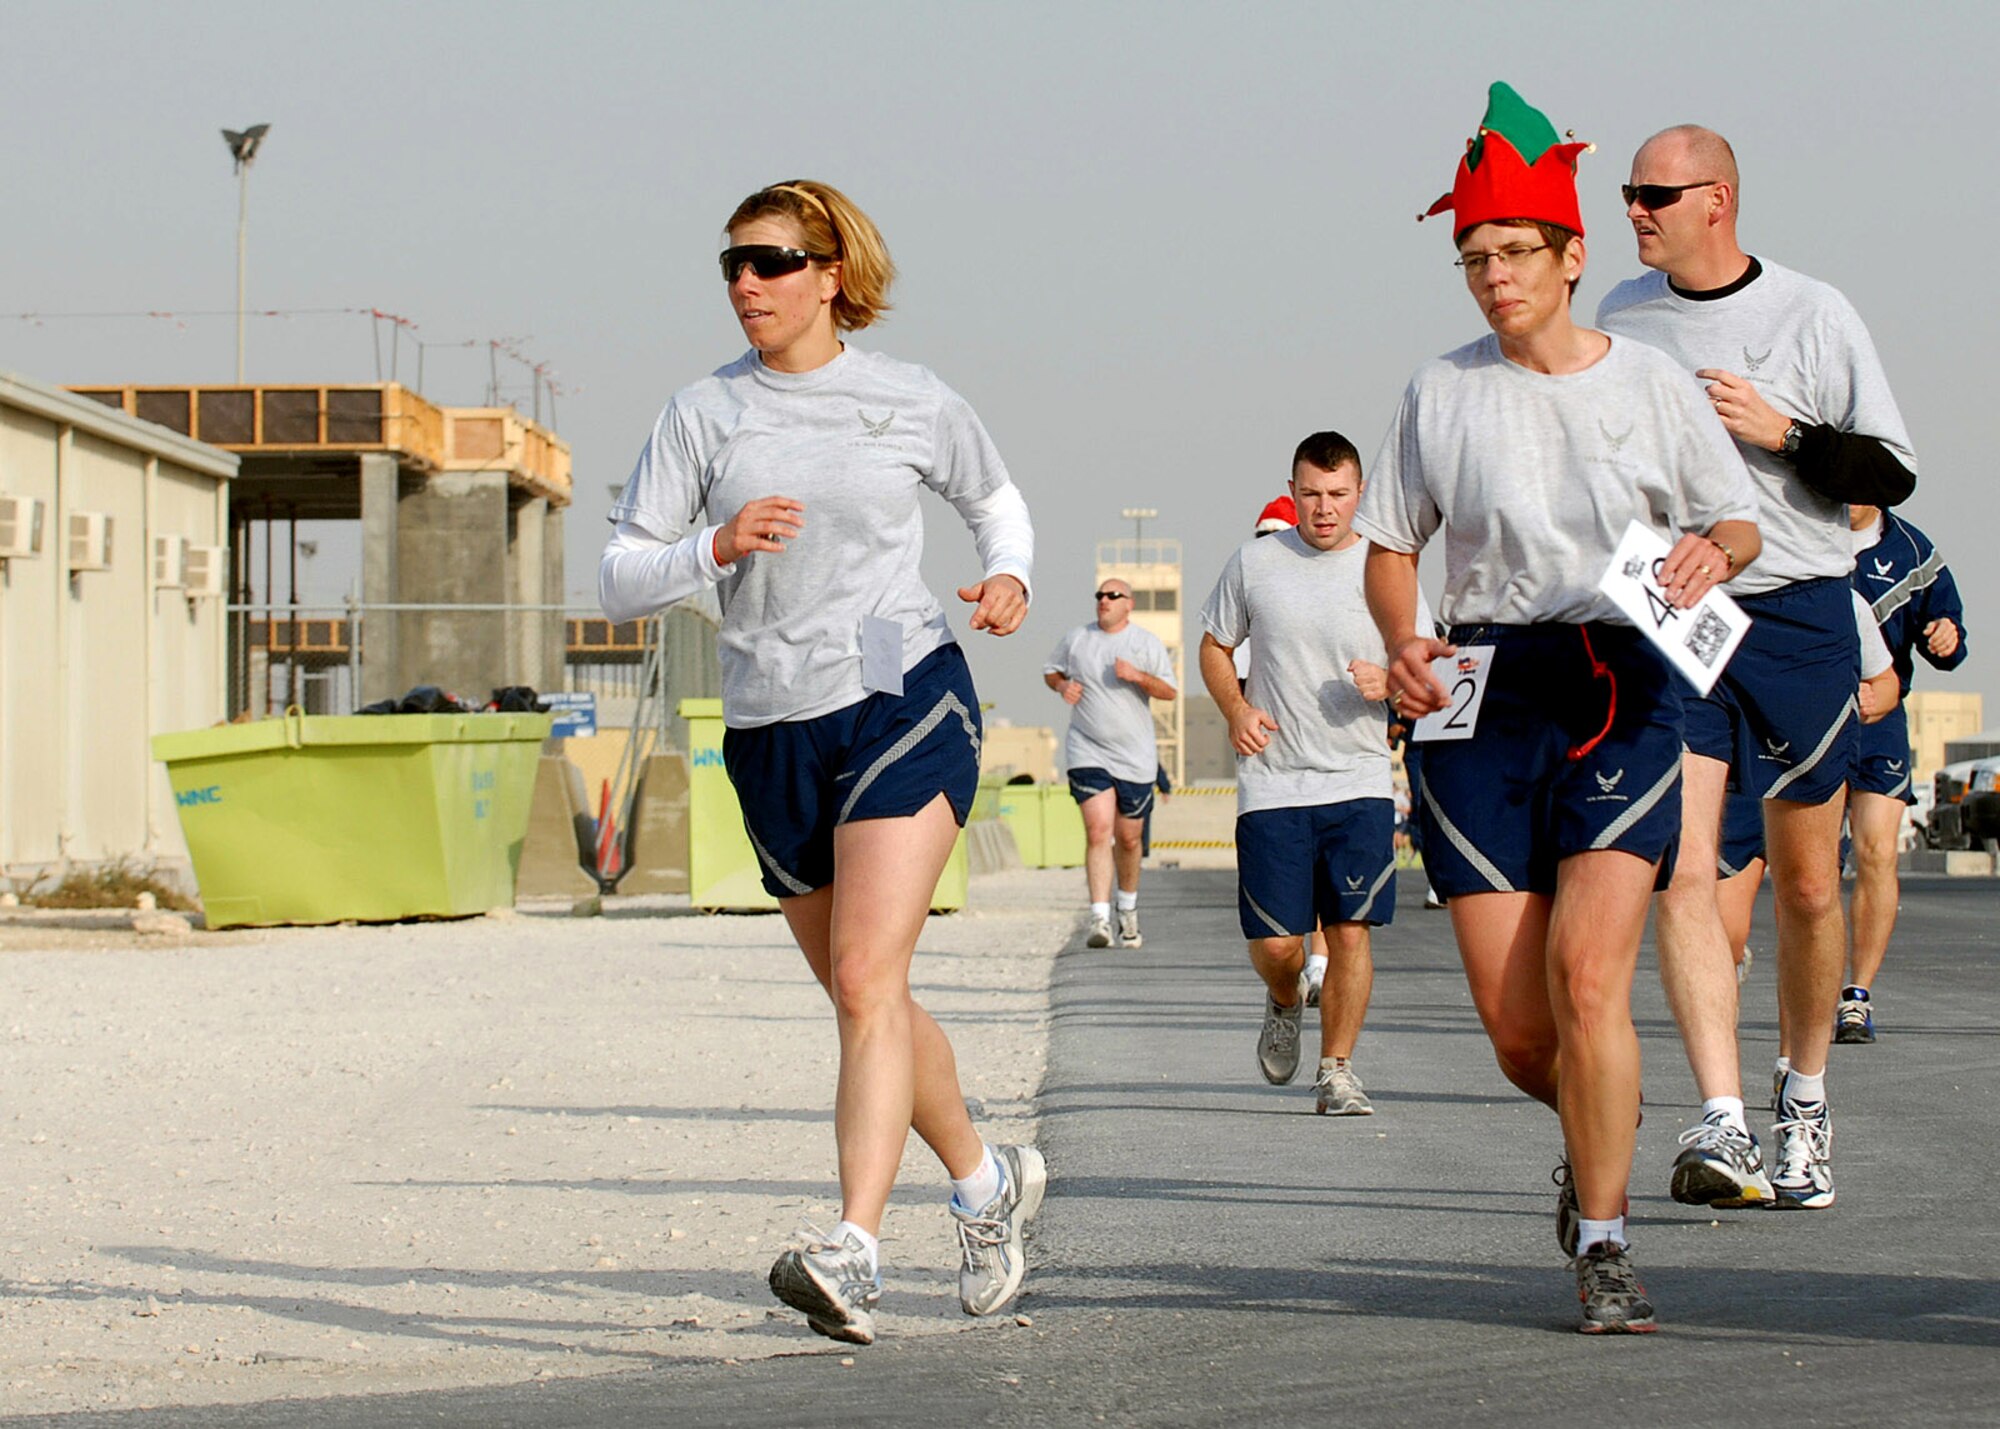 Lt. Col. Susan Ferrera (left) and Master Sgt. Julie Privette participate in a Reindeer Run Dec. 25 at a Southwest Asia air base. Colonel Ferrera is the 379th Expeditionary Services commander, and Sergeant Privette is assigned to the 379th ESVS. (U.S. Air Force photo/Staff Sgt. Douglas Olsen) 
